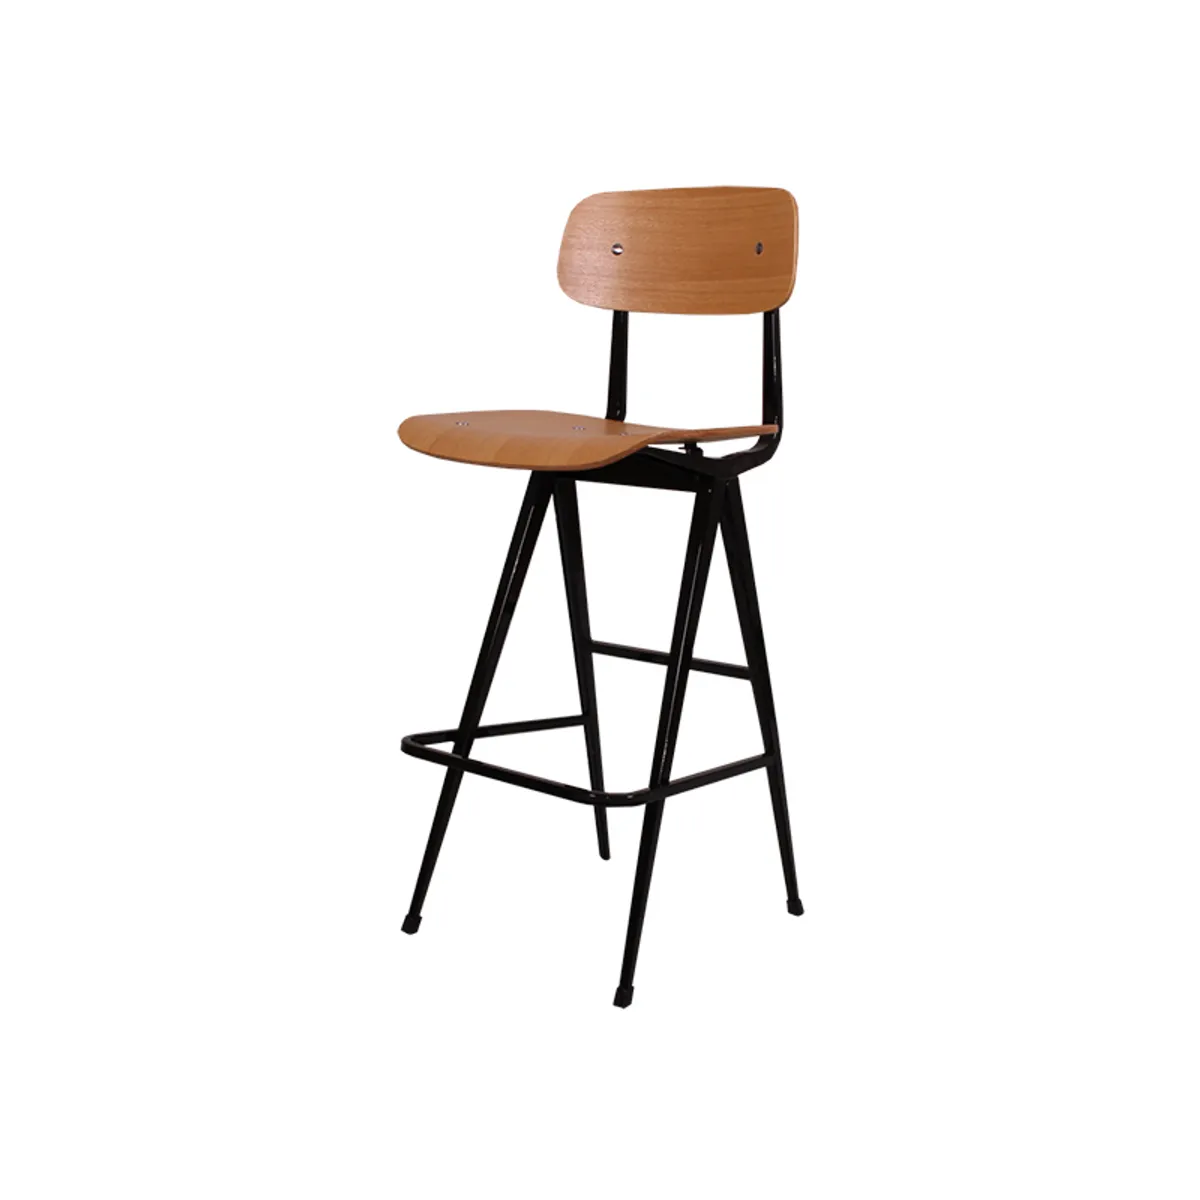 Venture Bar Stool Wooden And Steel Stool Classic Design For Cafes Bars And Restaurants 023